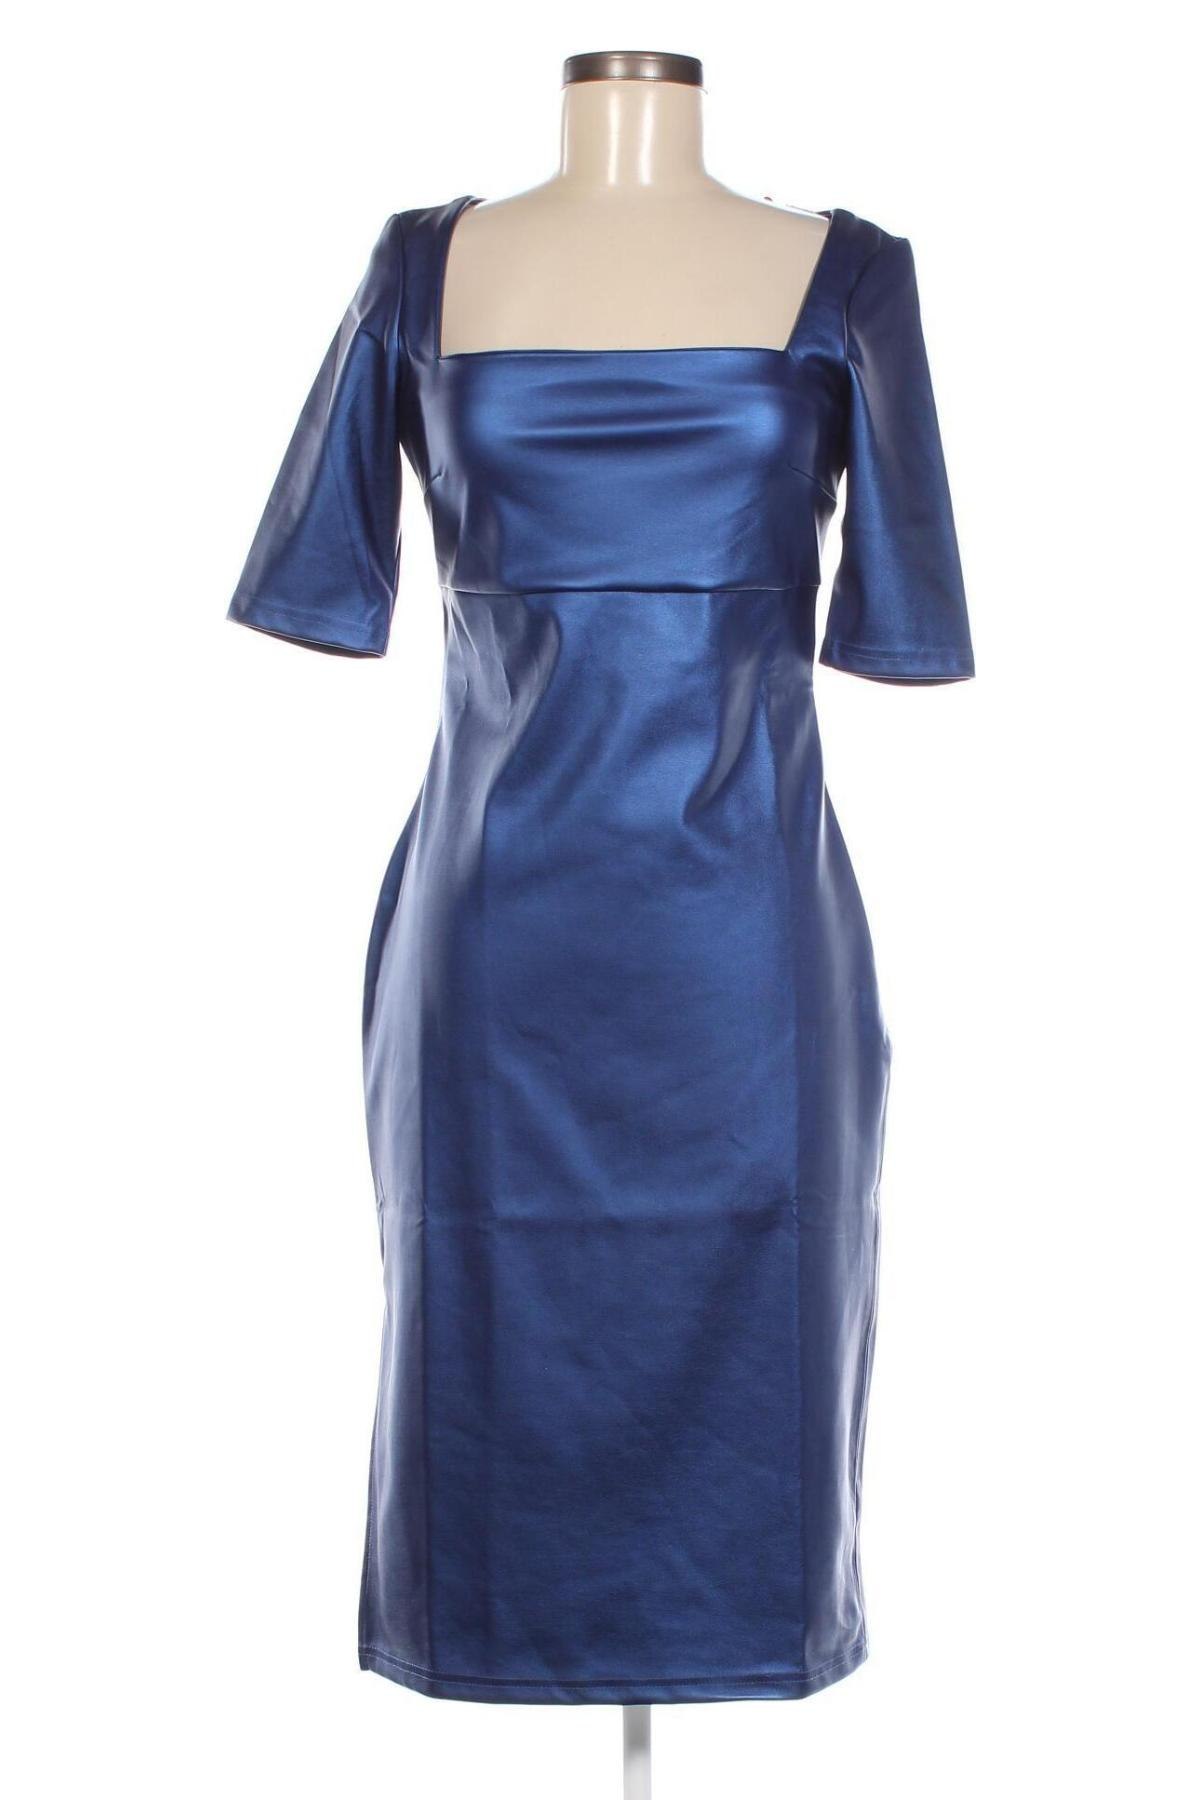 Kleid Katy Perry exclusive for ABOUT YOU, Größe M, Farbe Blau, Preis € 33,40